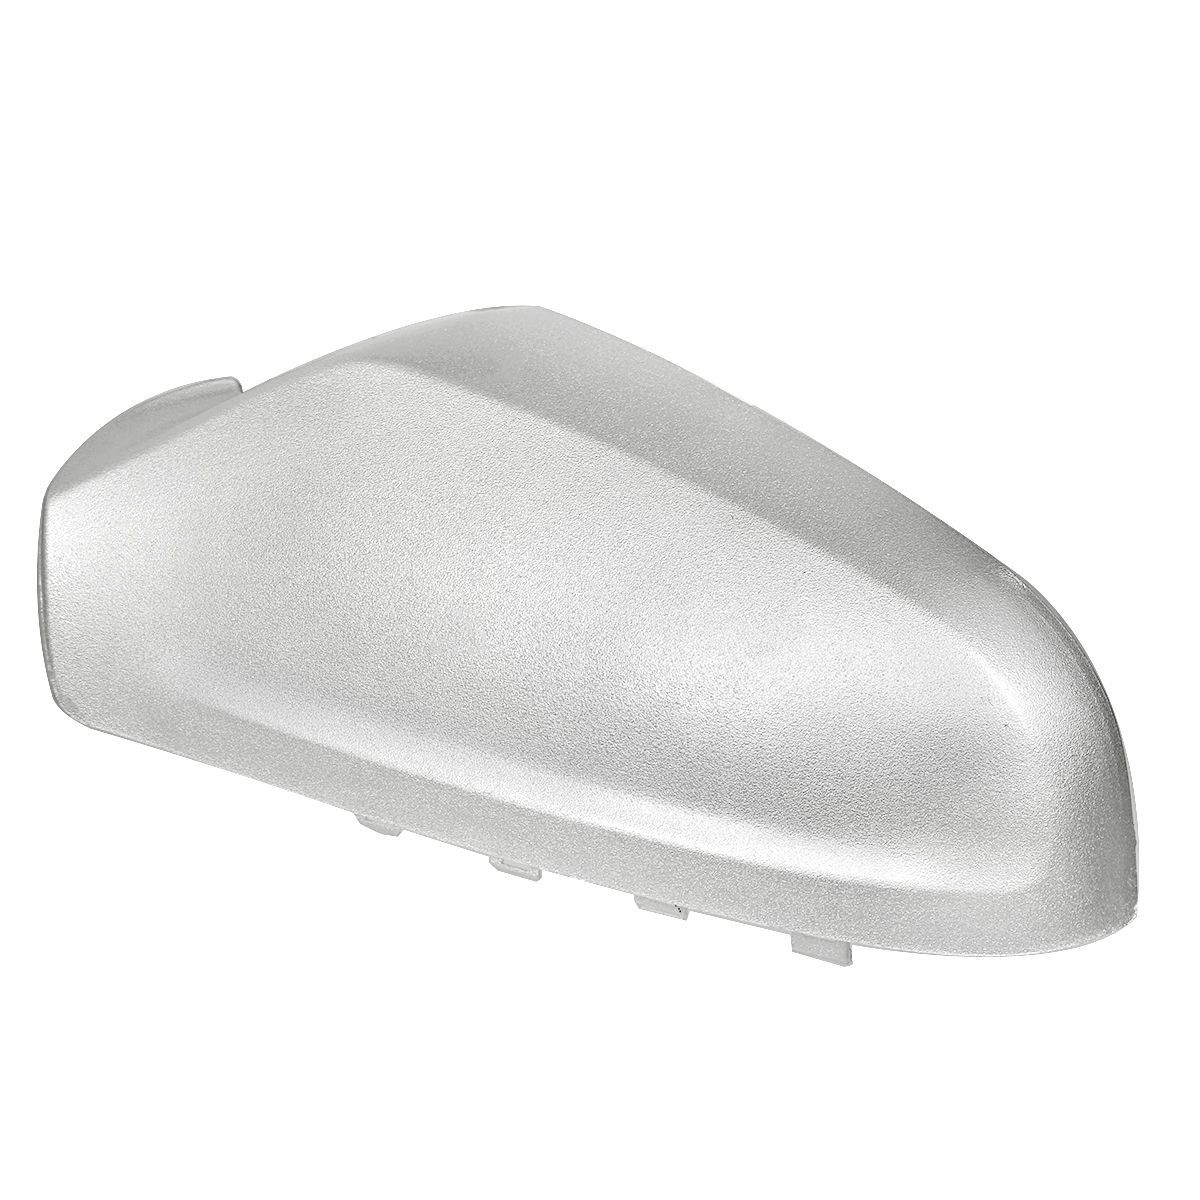 Left-Door-Wing-Mirror-Cover-Silver-NS-Passenger-For-Vauxhall-Astra-H-MK5-2005-2009-1700170